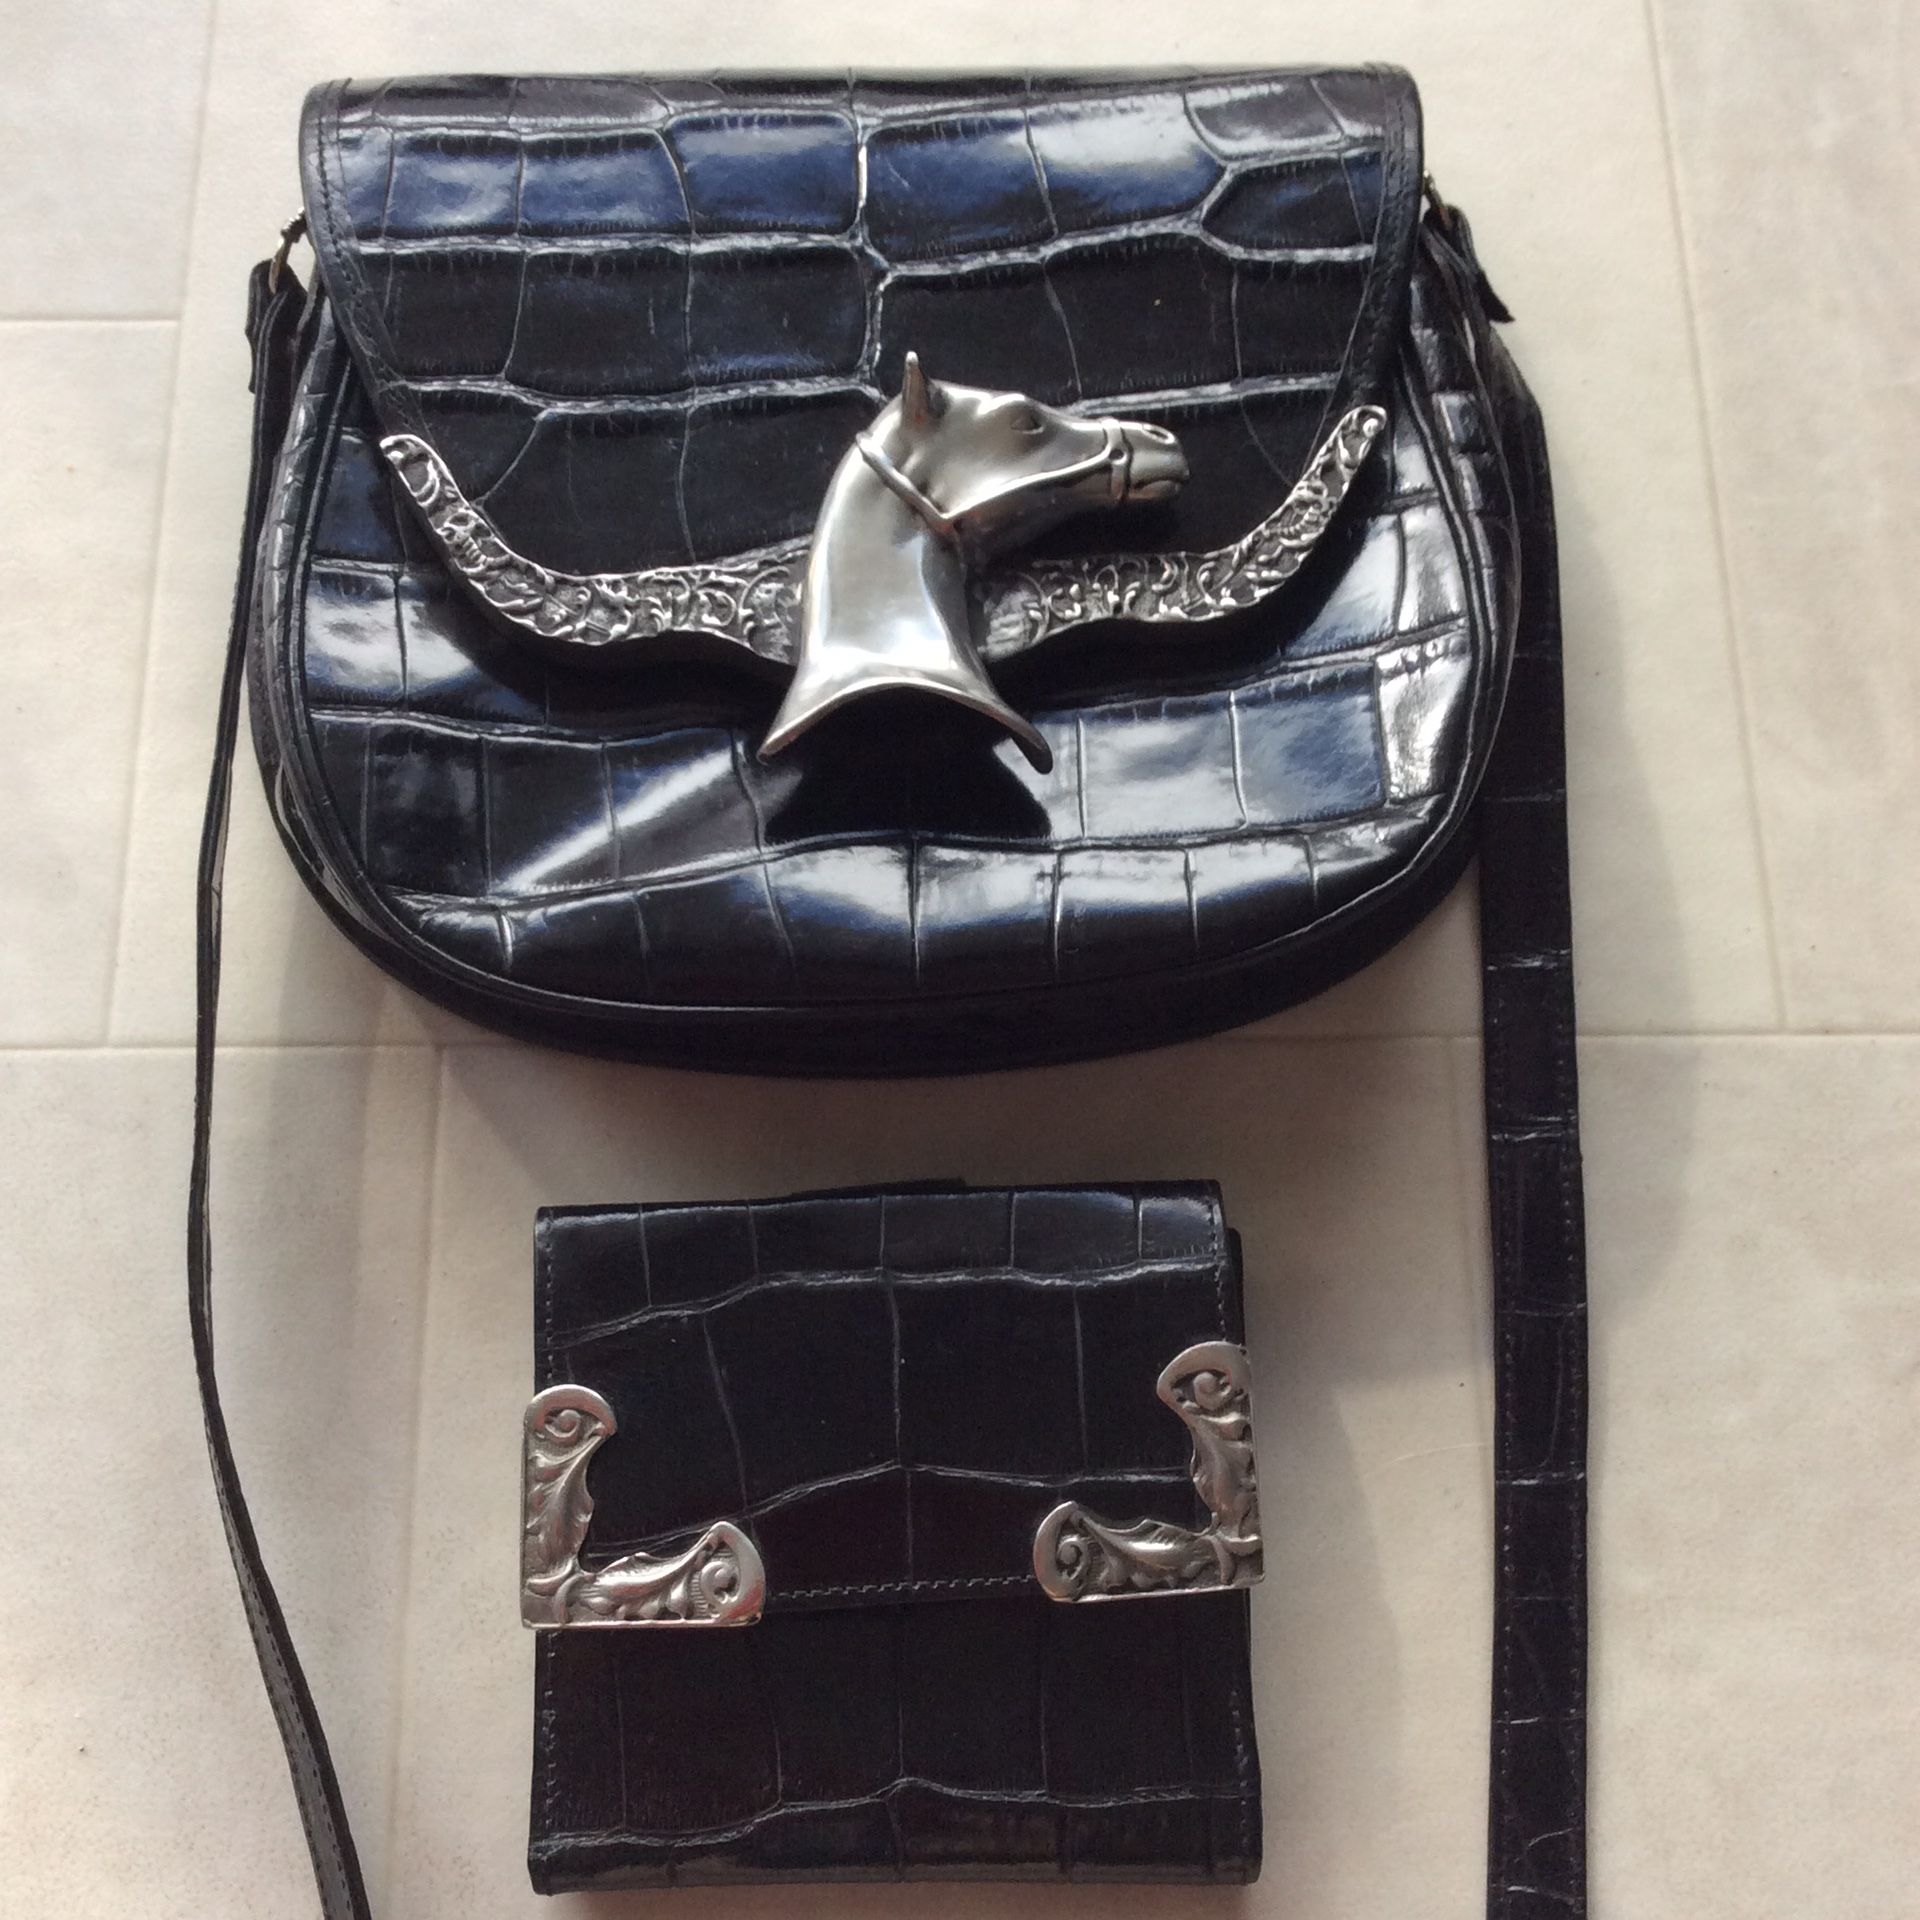 Glen Miller for Trina Turk Vintage West Horsehead Bag & Wallet Crocodile Leather with Heavy Silver Metal Accents Crossbody purse and Matching Wallet